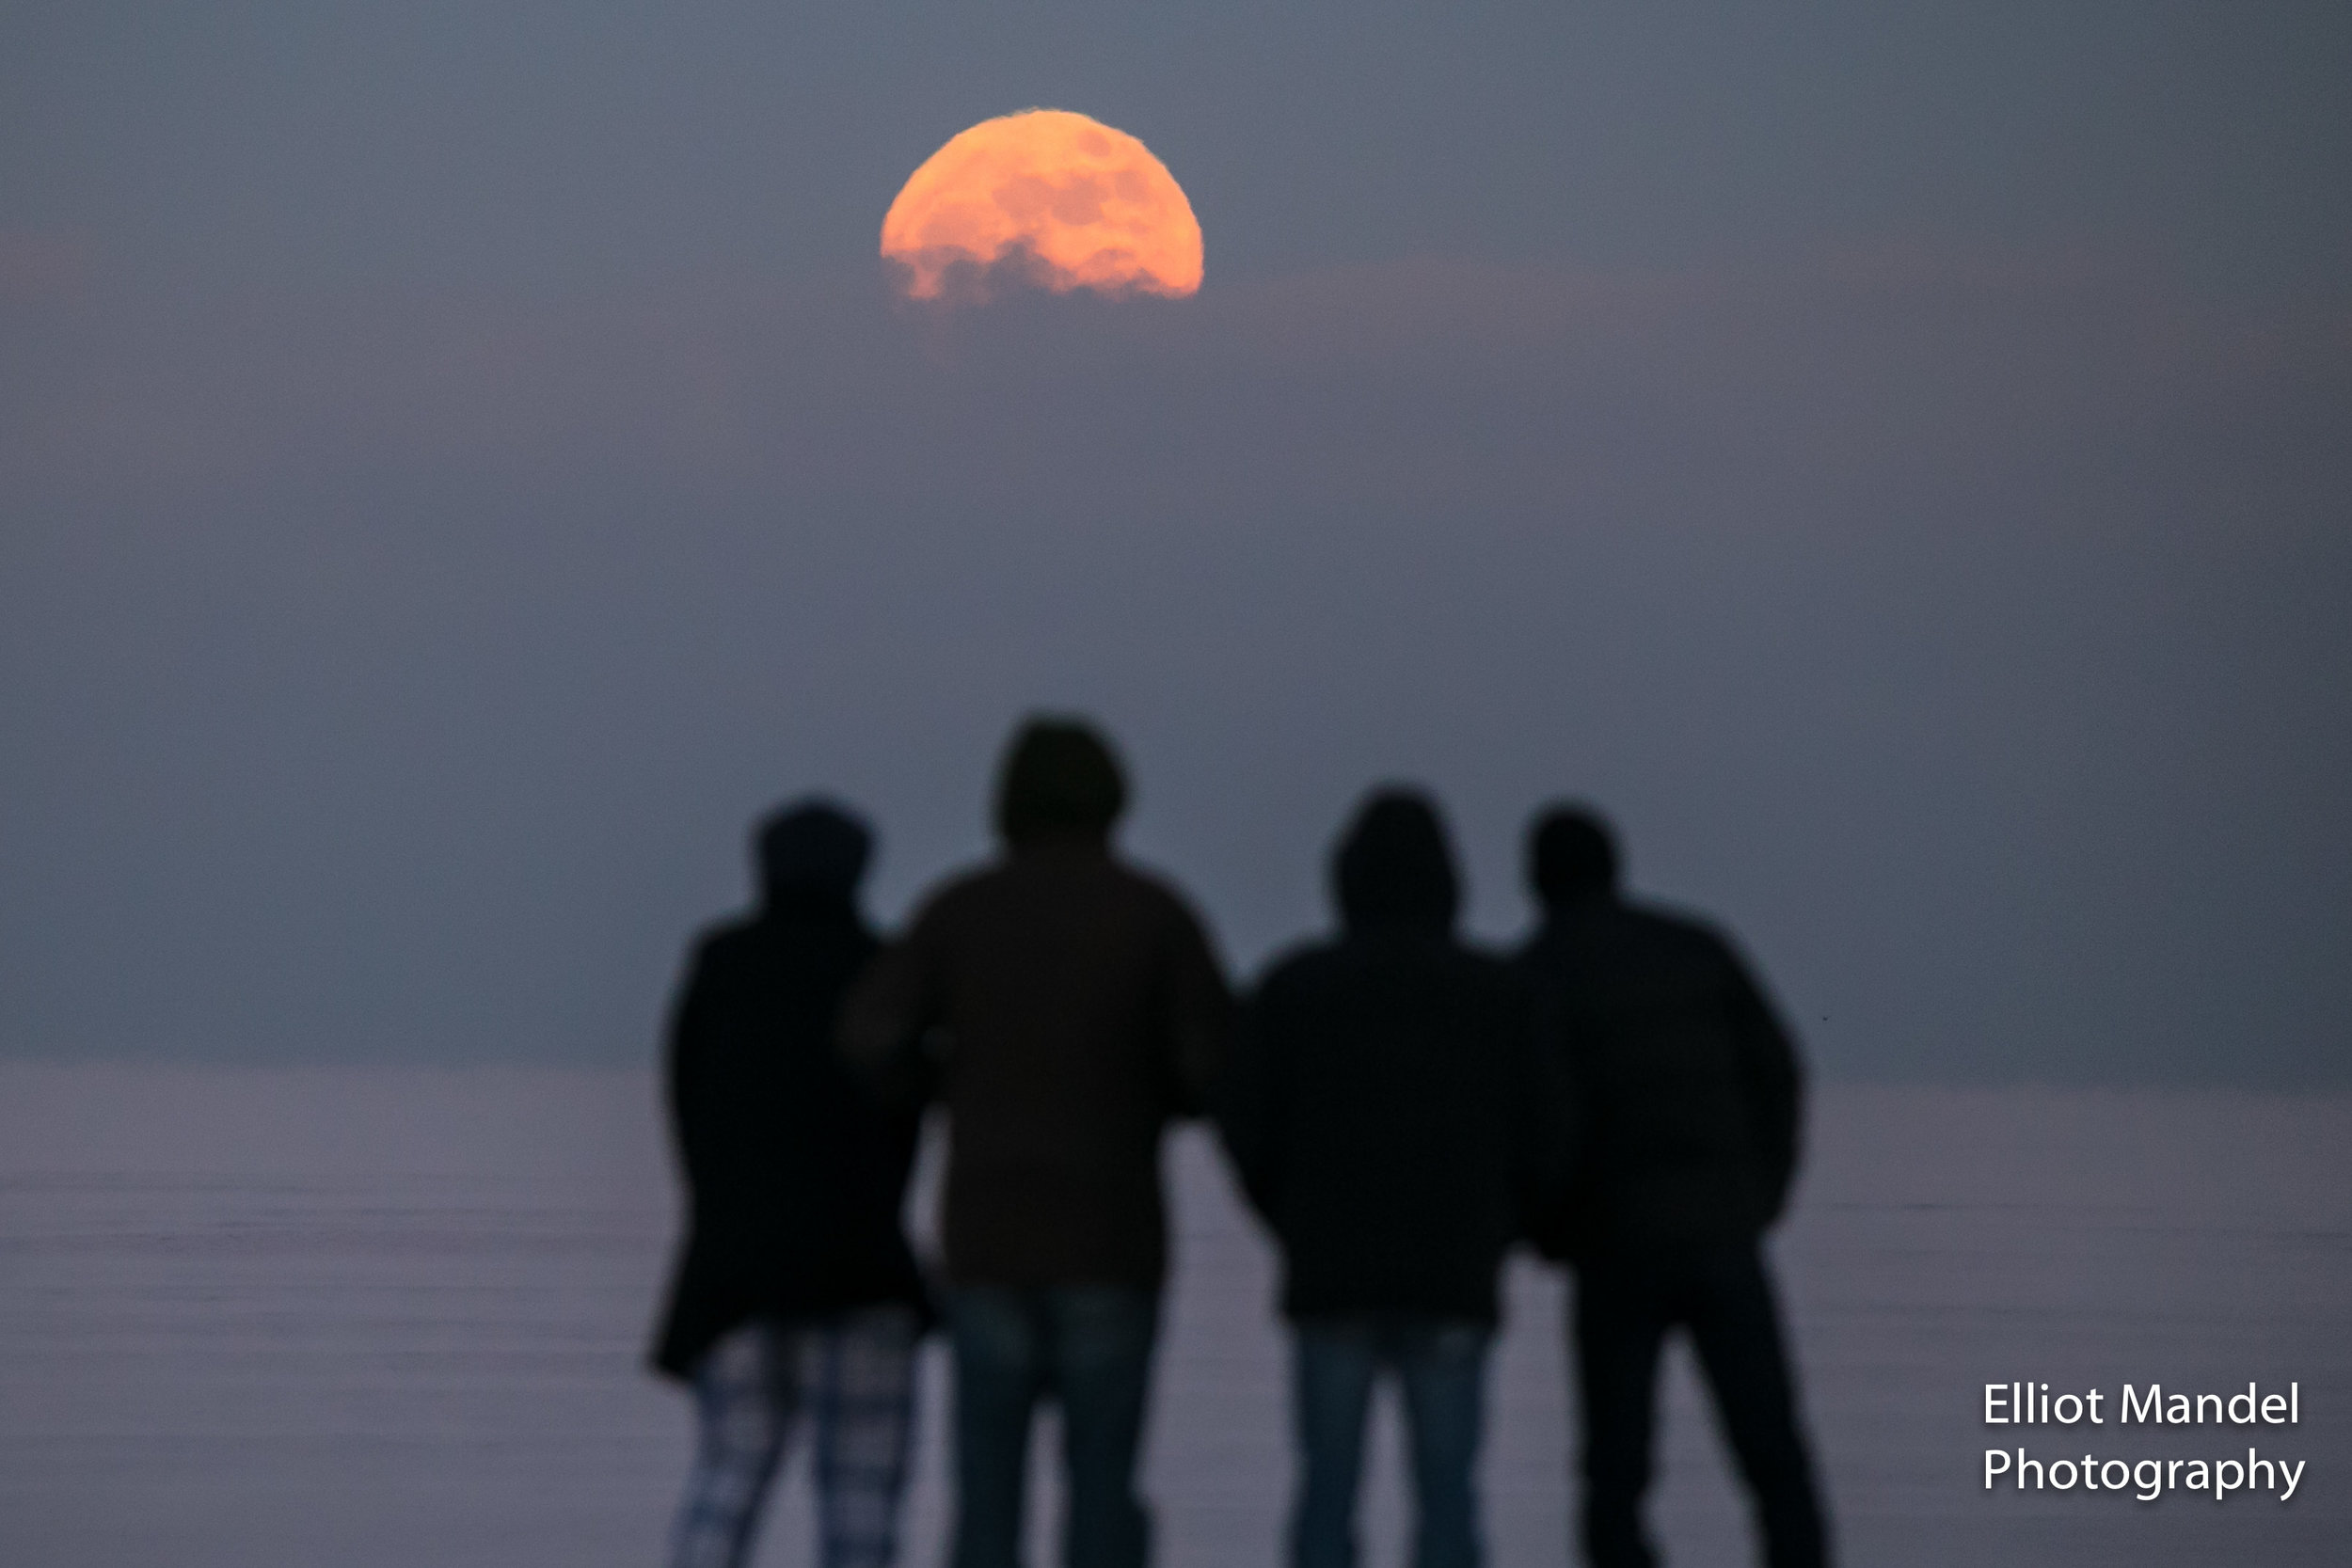  A Supermoon rises over Lake Michigan on January 1, 2018.&nbsp; 